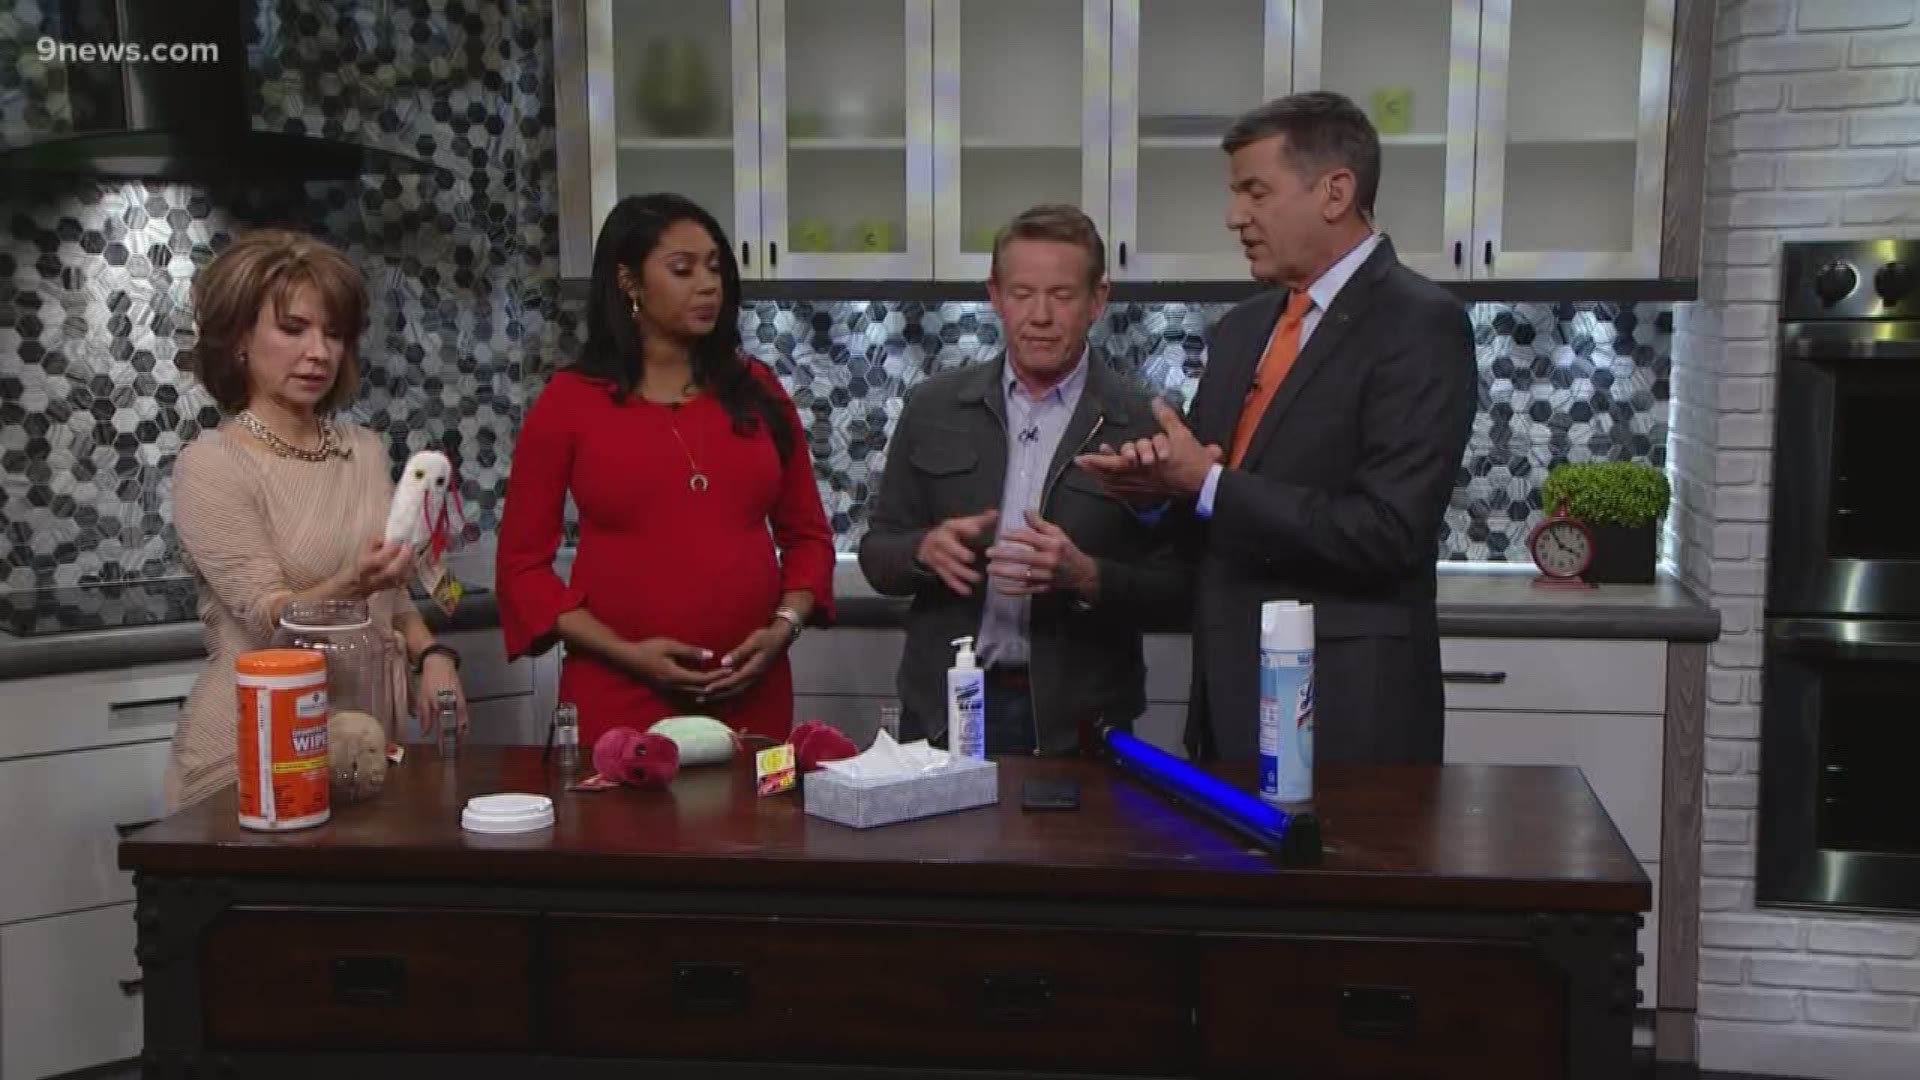 We all know how important it is to wash our hands to slow down the spread of germs and viruses. Our science guy Steve Spangler has a visual reminder to help.